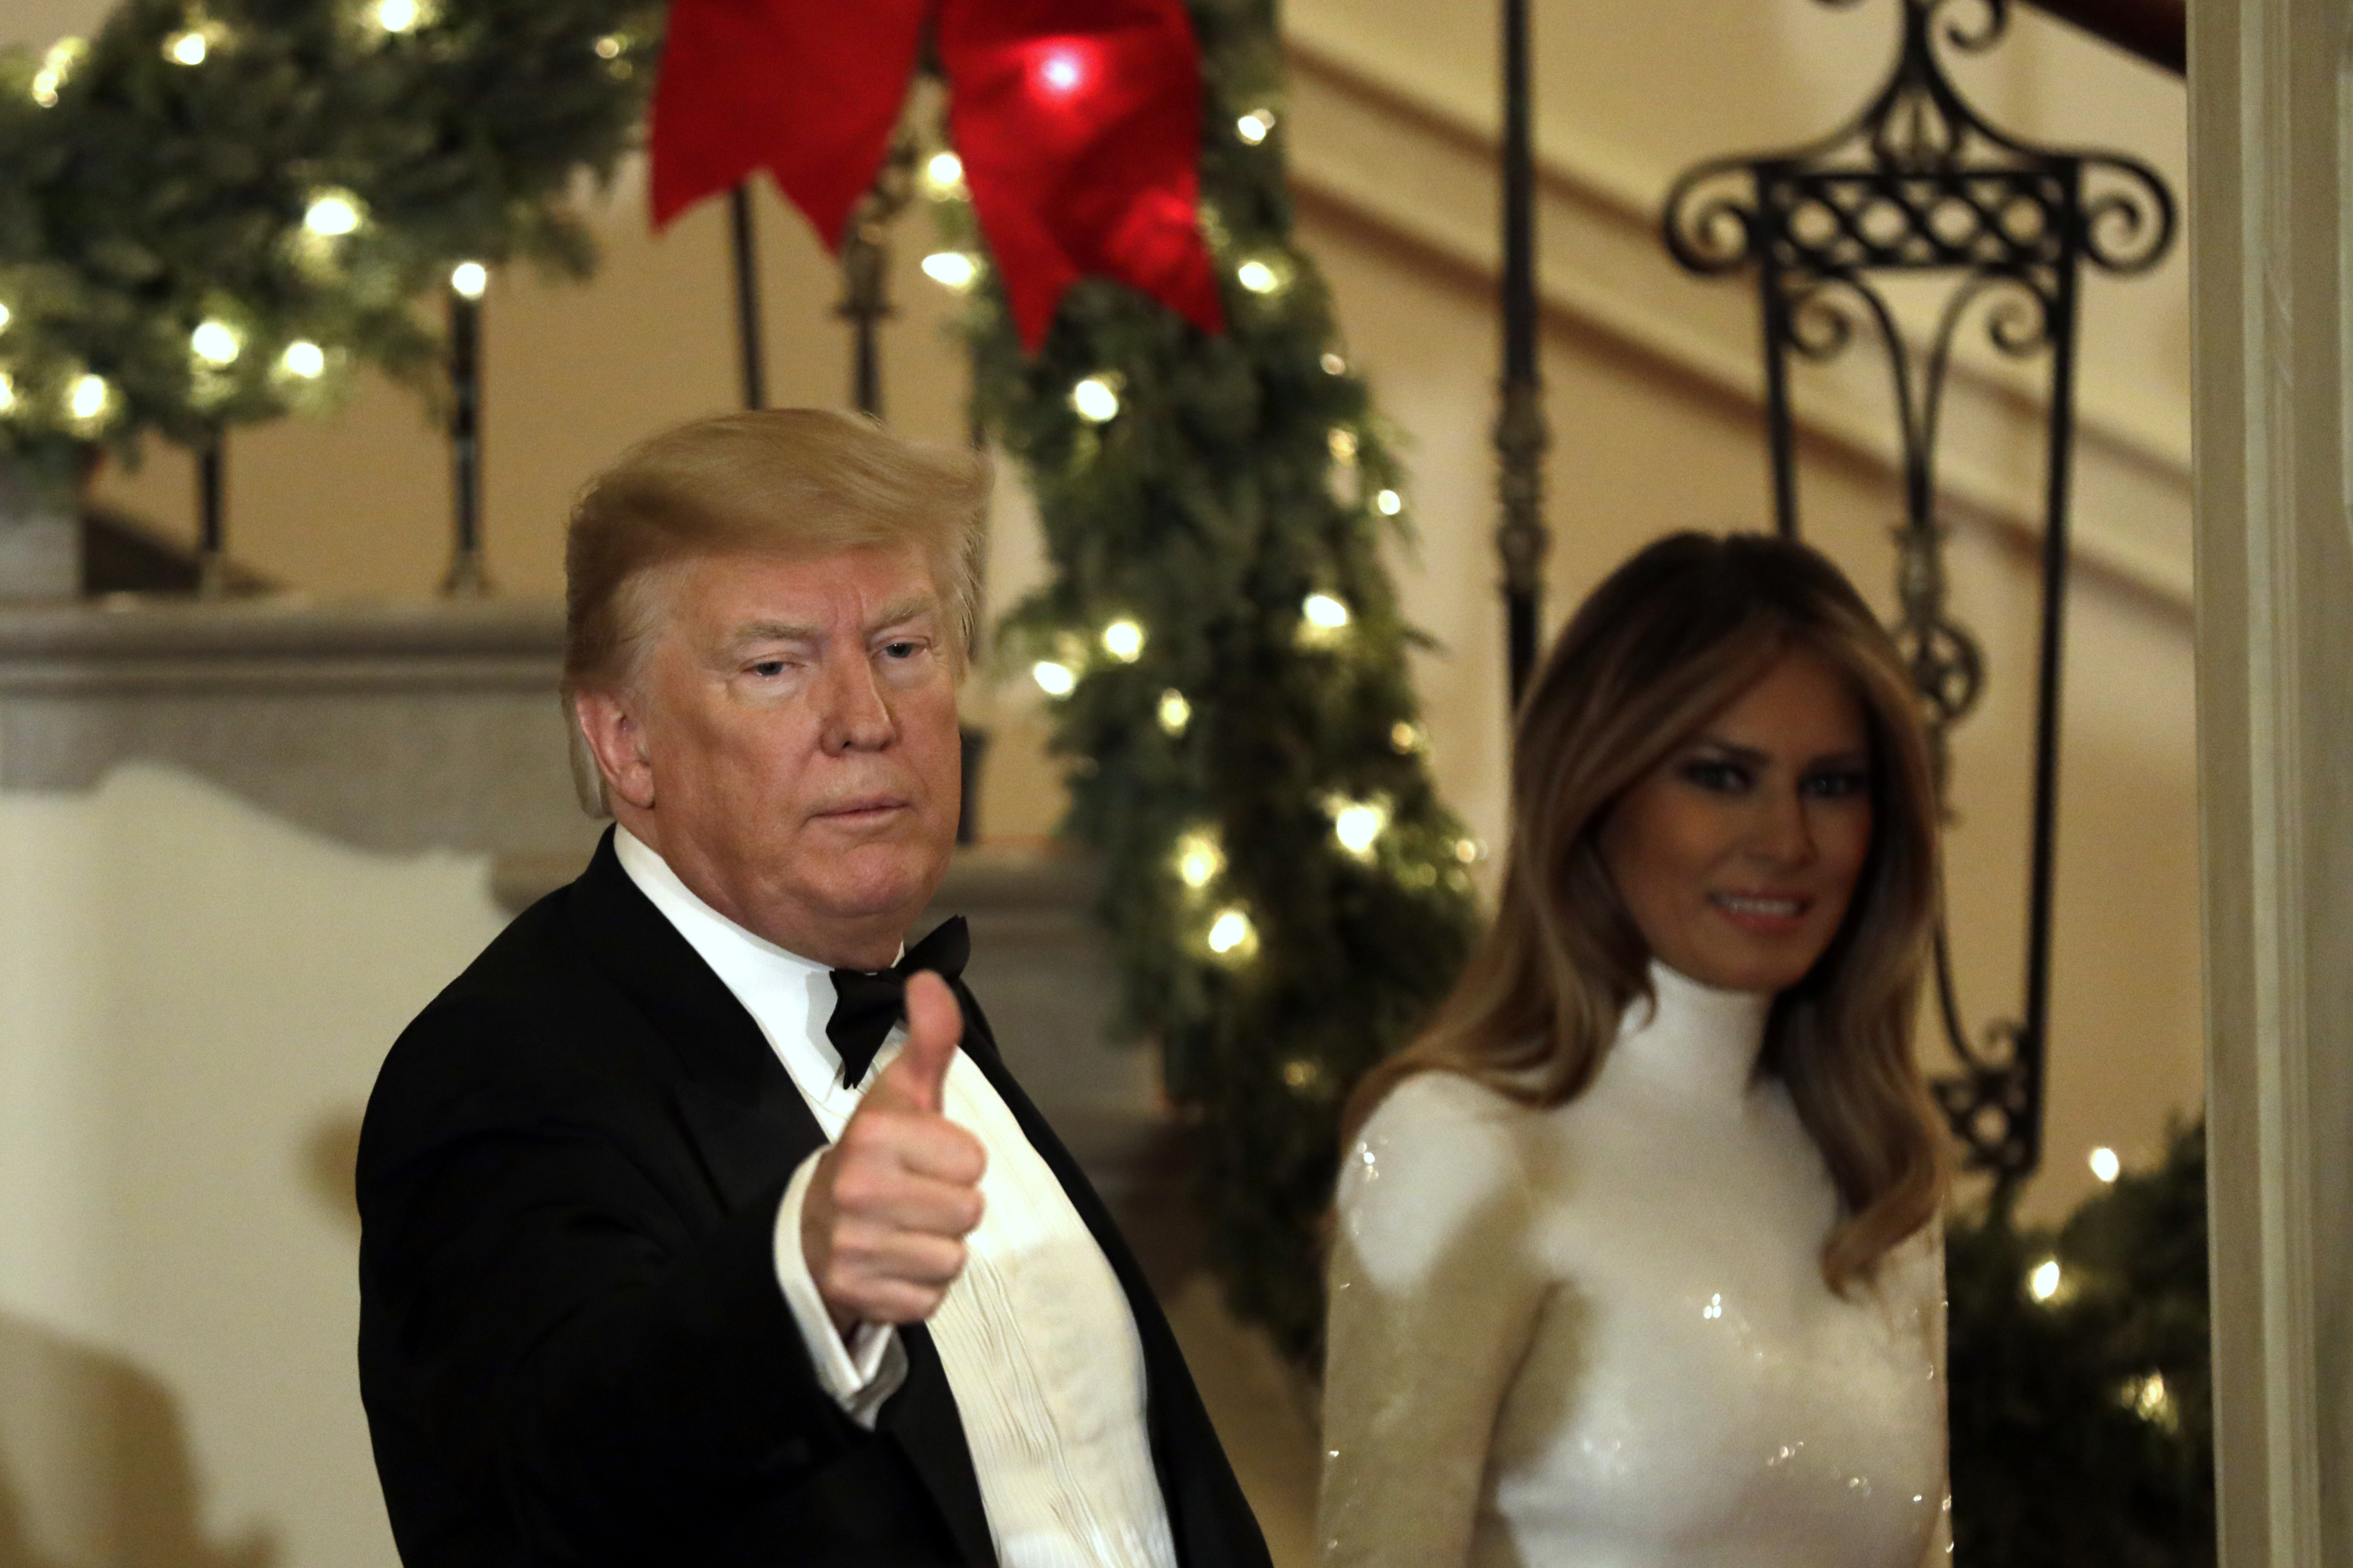 President Donald Trump and First Lady Melania Trump greet guests at the Congressional Ball at White House in Washington on December 15, 2018. (Yuri Gripas-Pool/Getty Images)